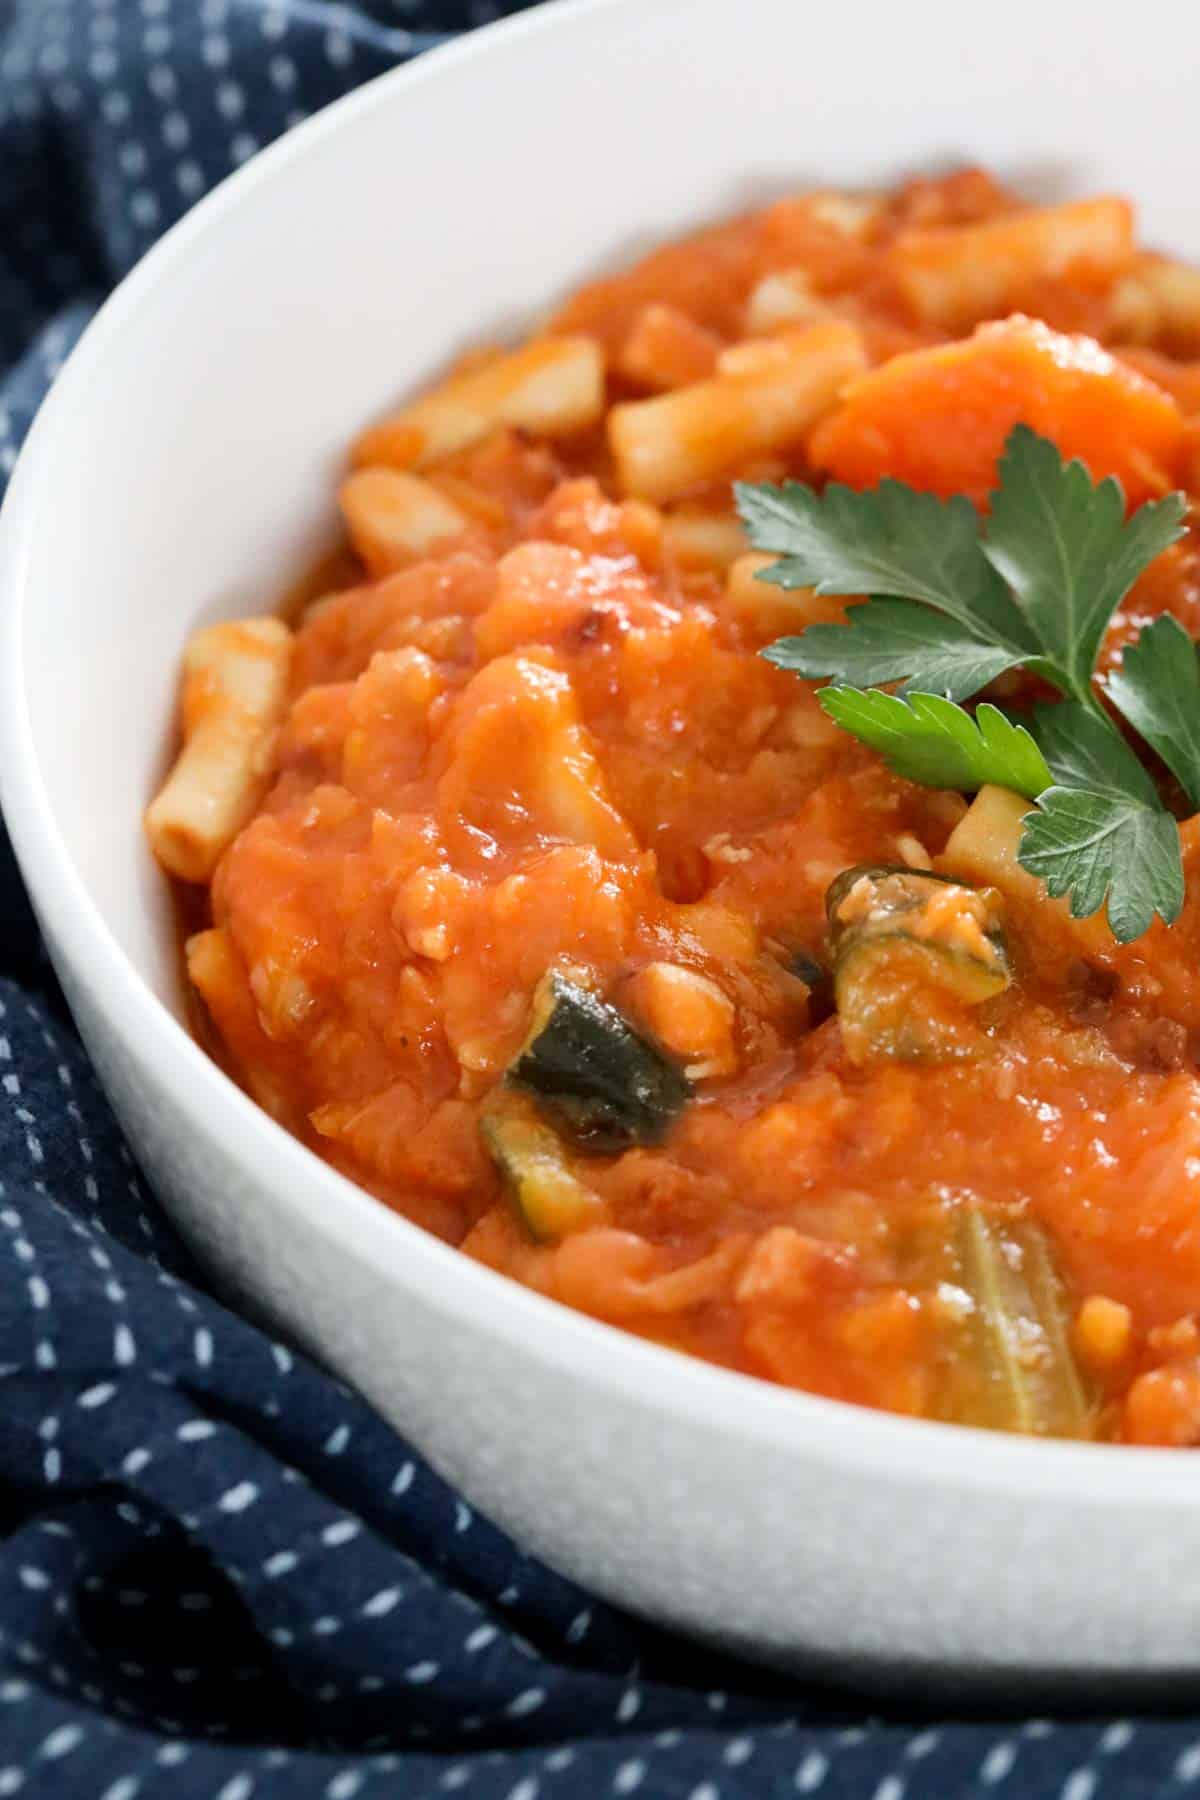 A thick vegetable, tomato and pasta soup in a bowl.